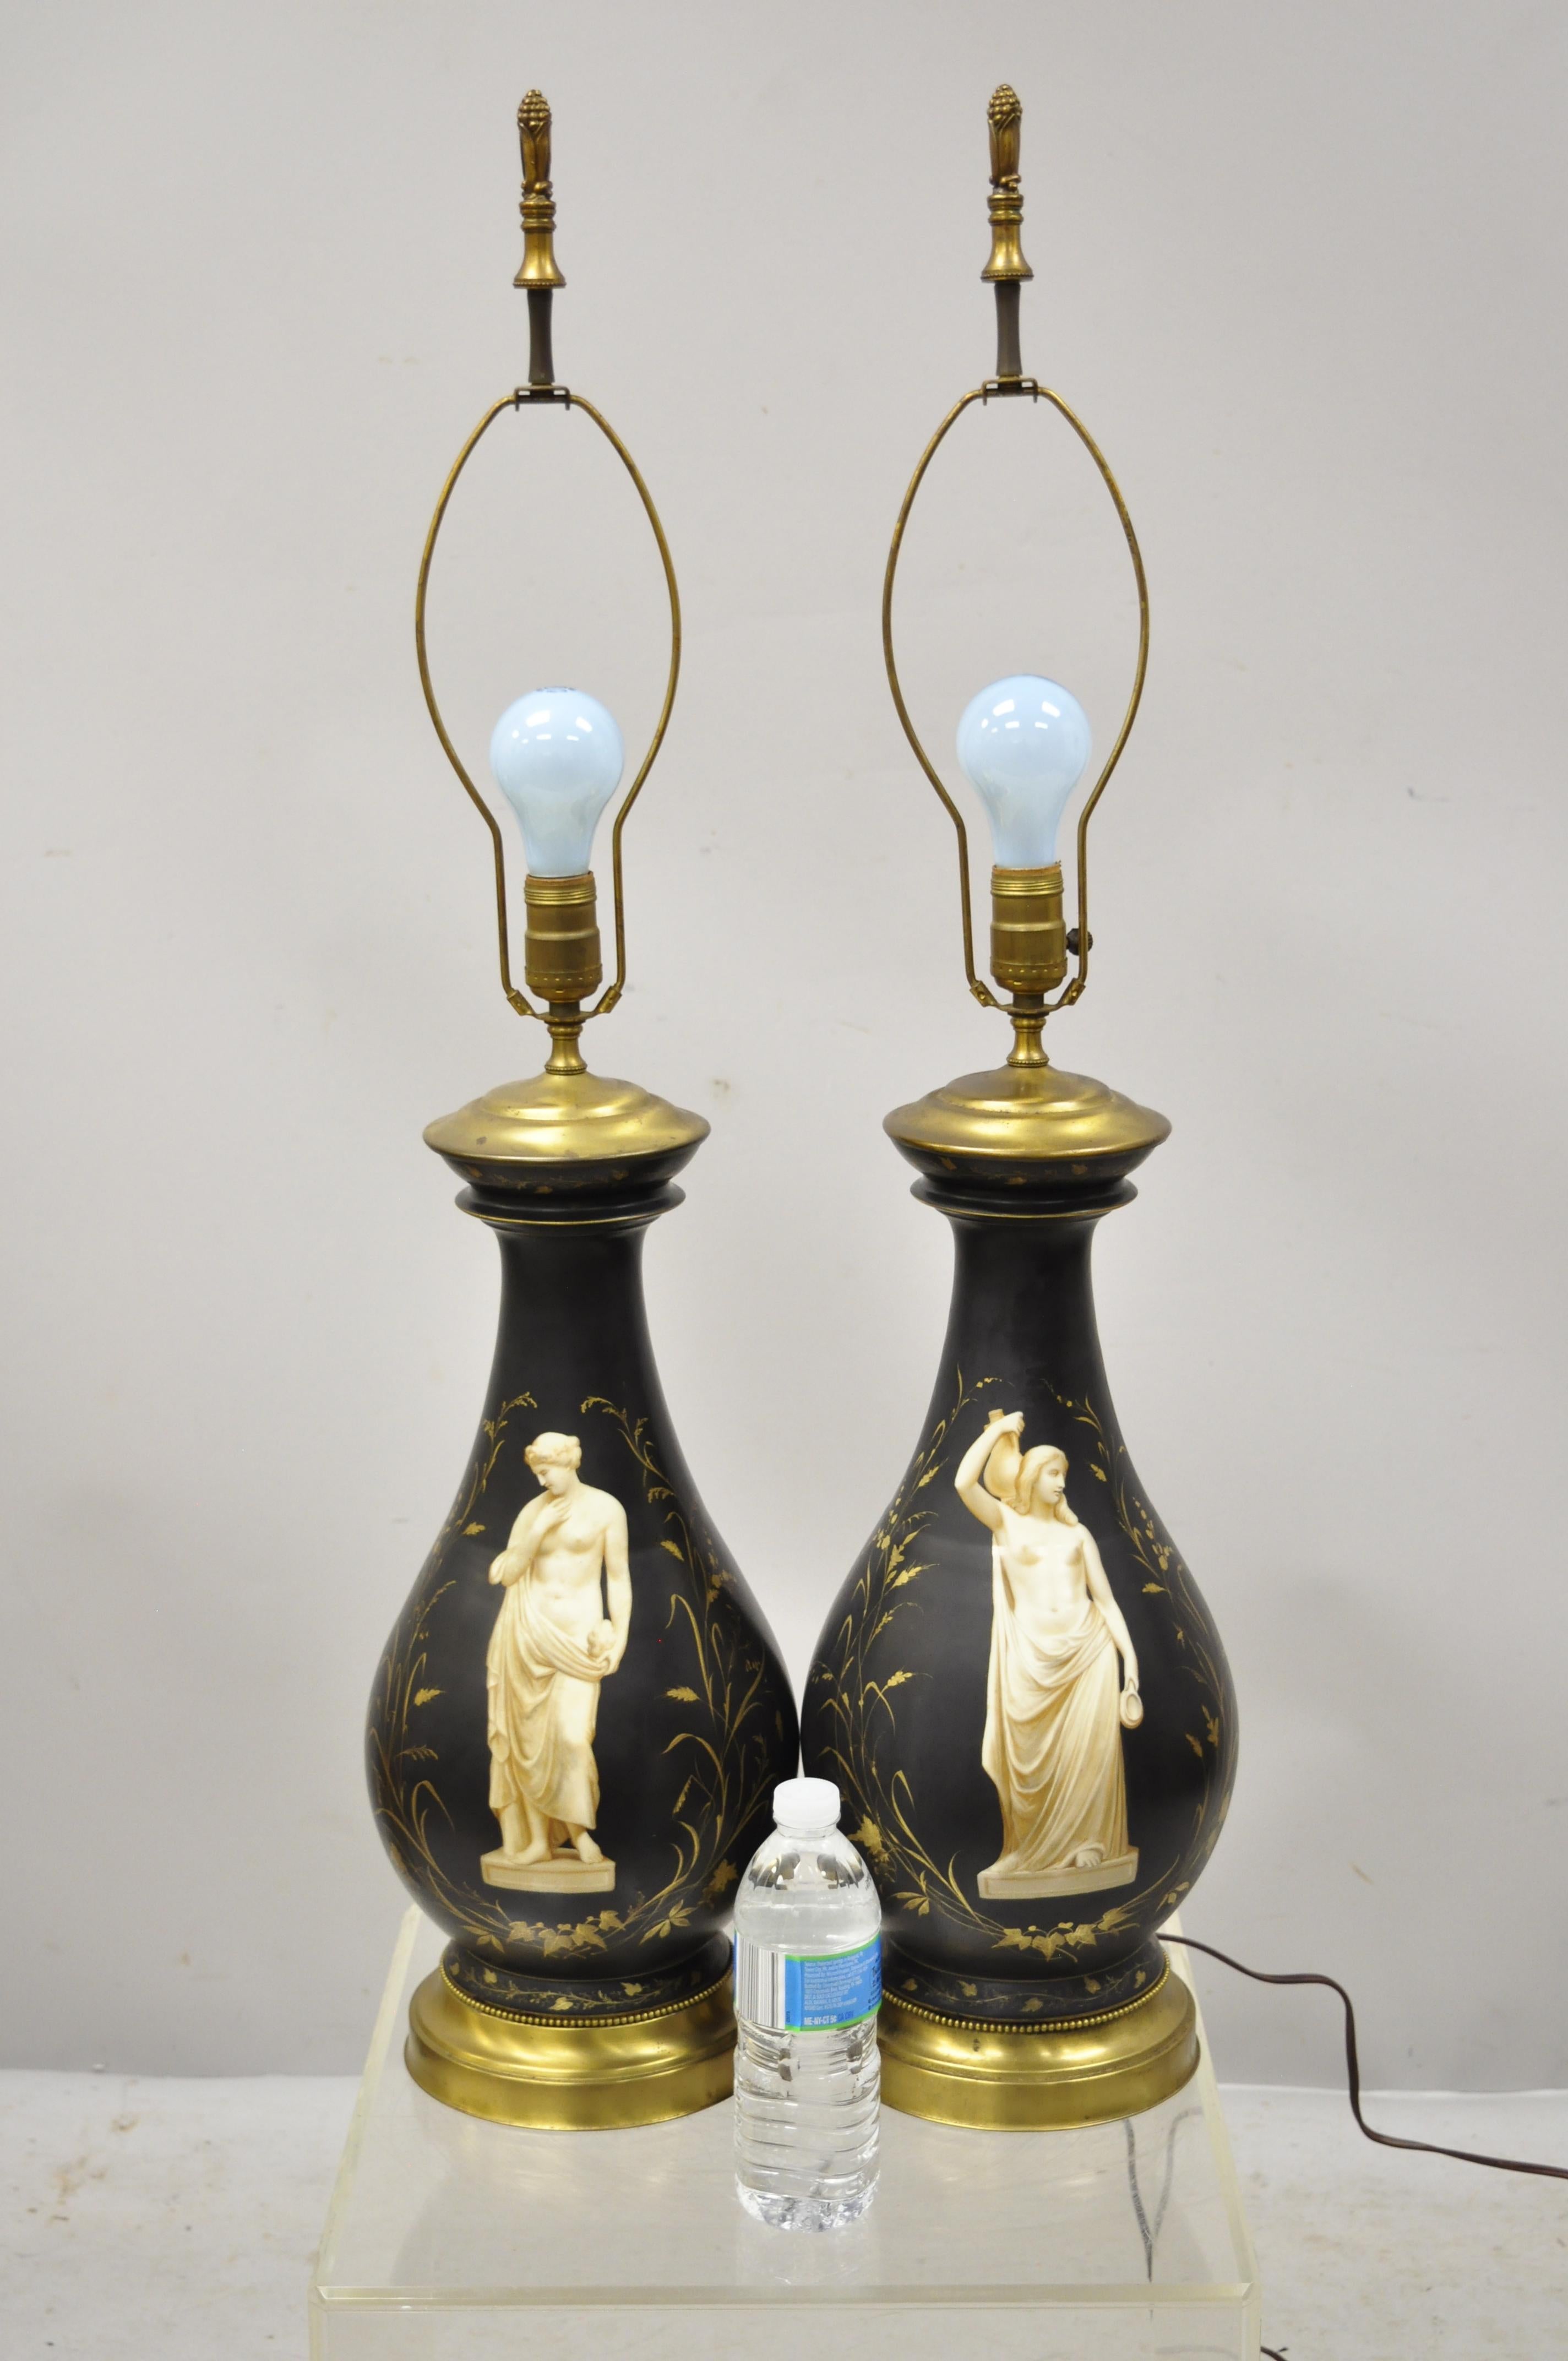 Antique French neoclassical black porcelain classical bulbous table lamps - a pair. Item features black bulbous porcelain bodies, painted figural neoclassical/classical figures and leafy scrollwork, very nice antique item, great style and form,